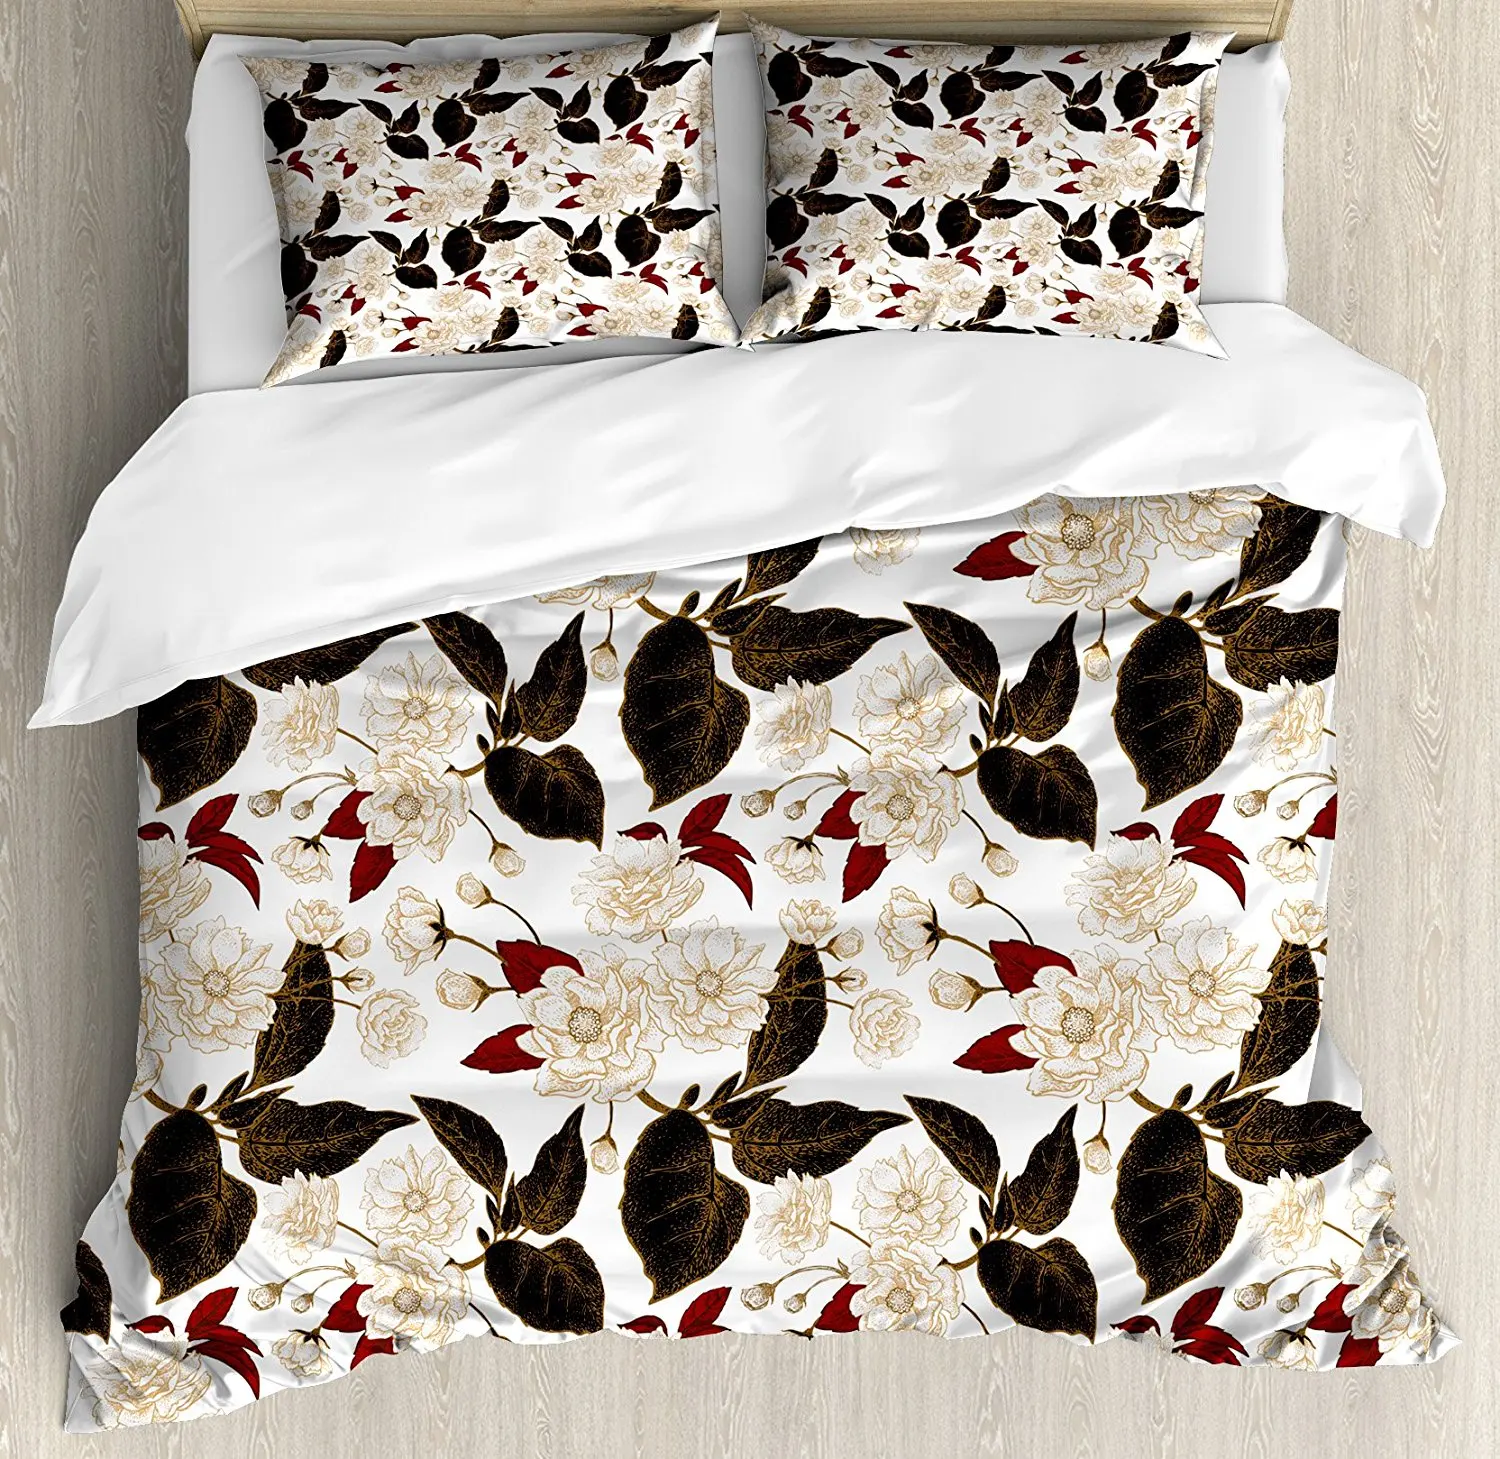 Floral Duvet Cover Set Chinese Plum Flowers Branches Eastern